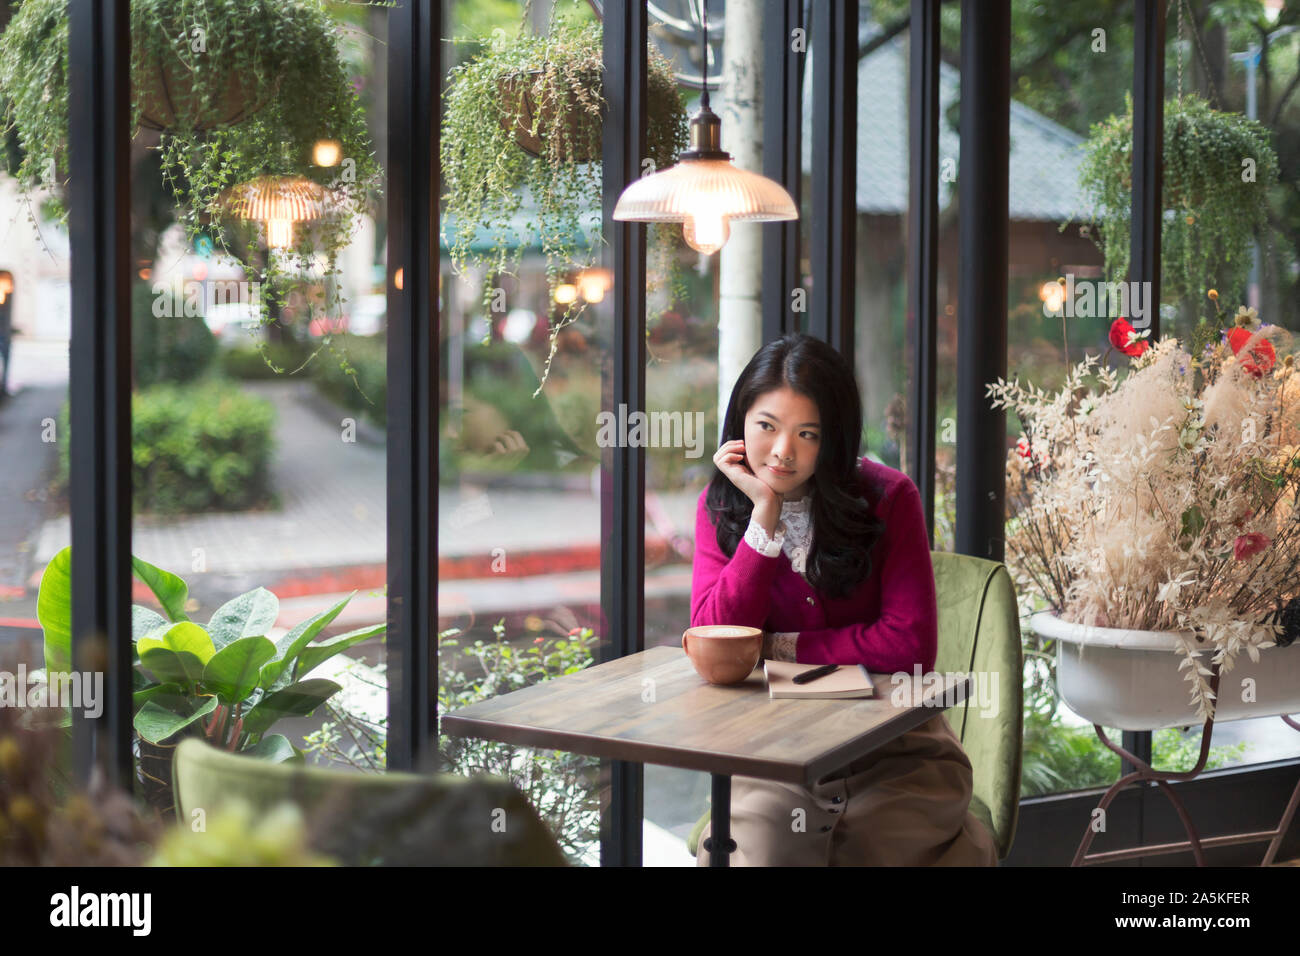 Woman sitting by window in cafe Stock Photo